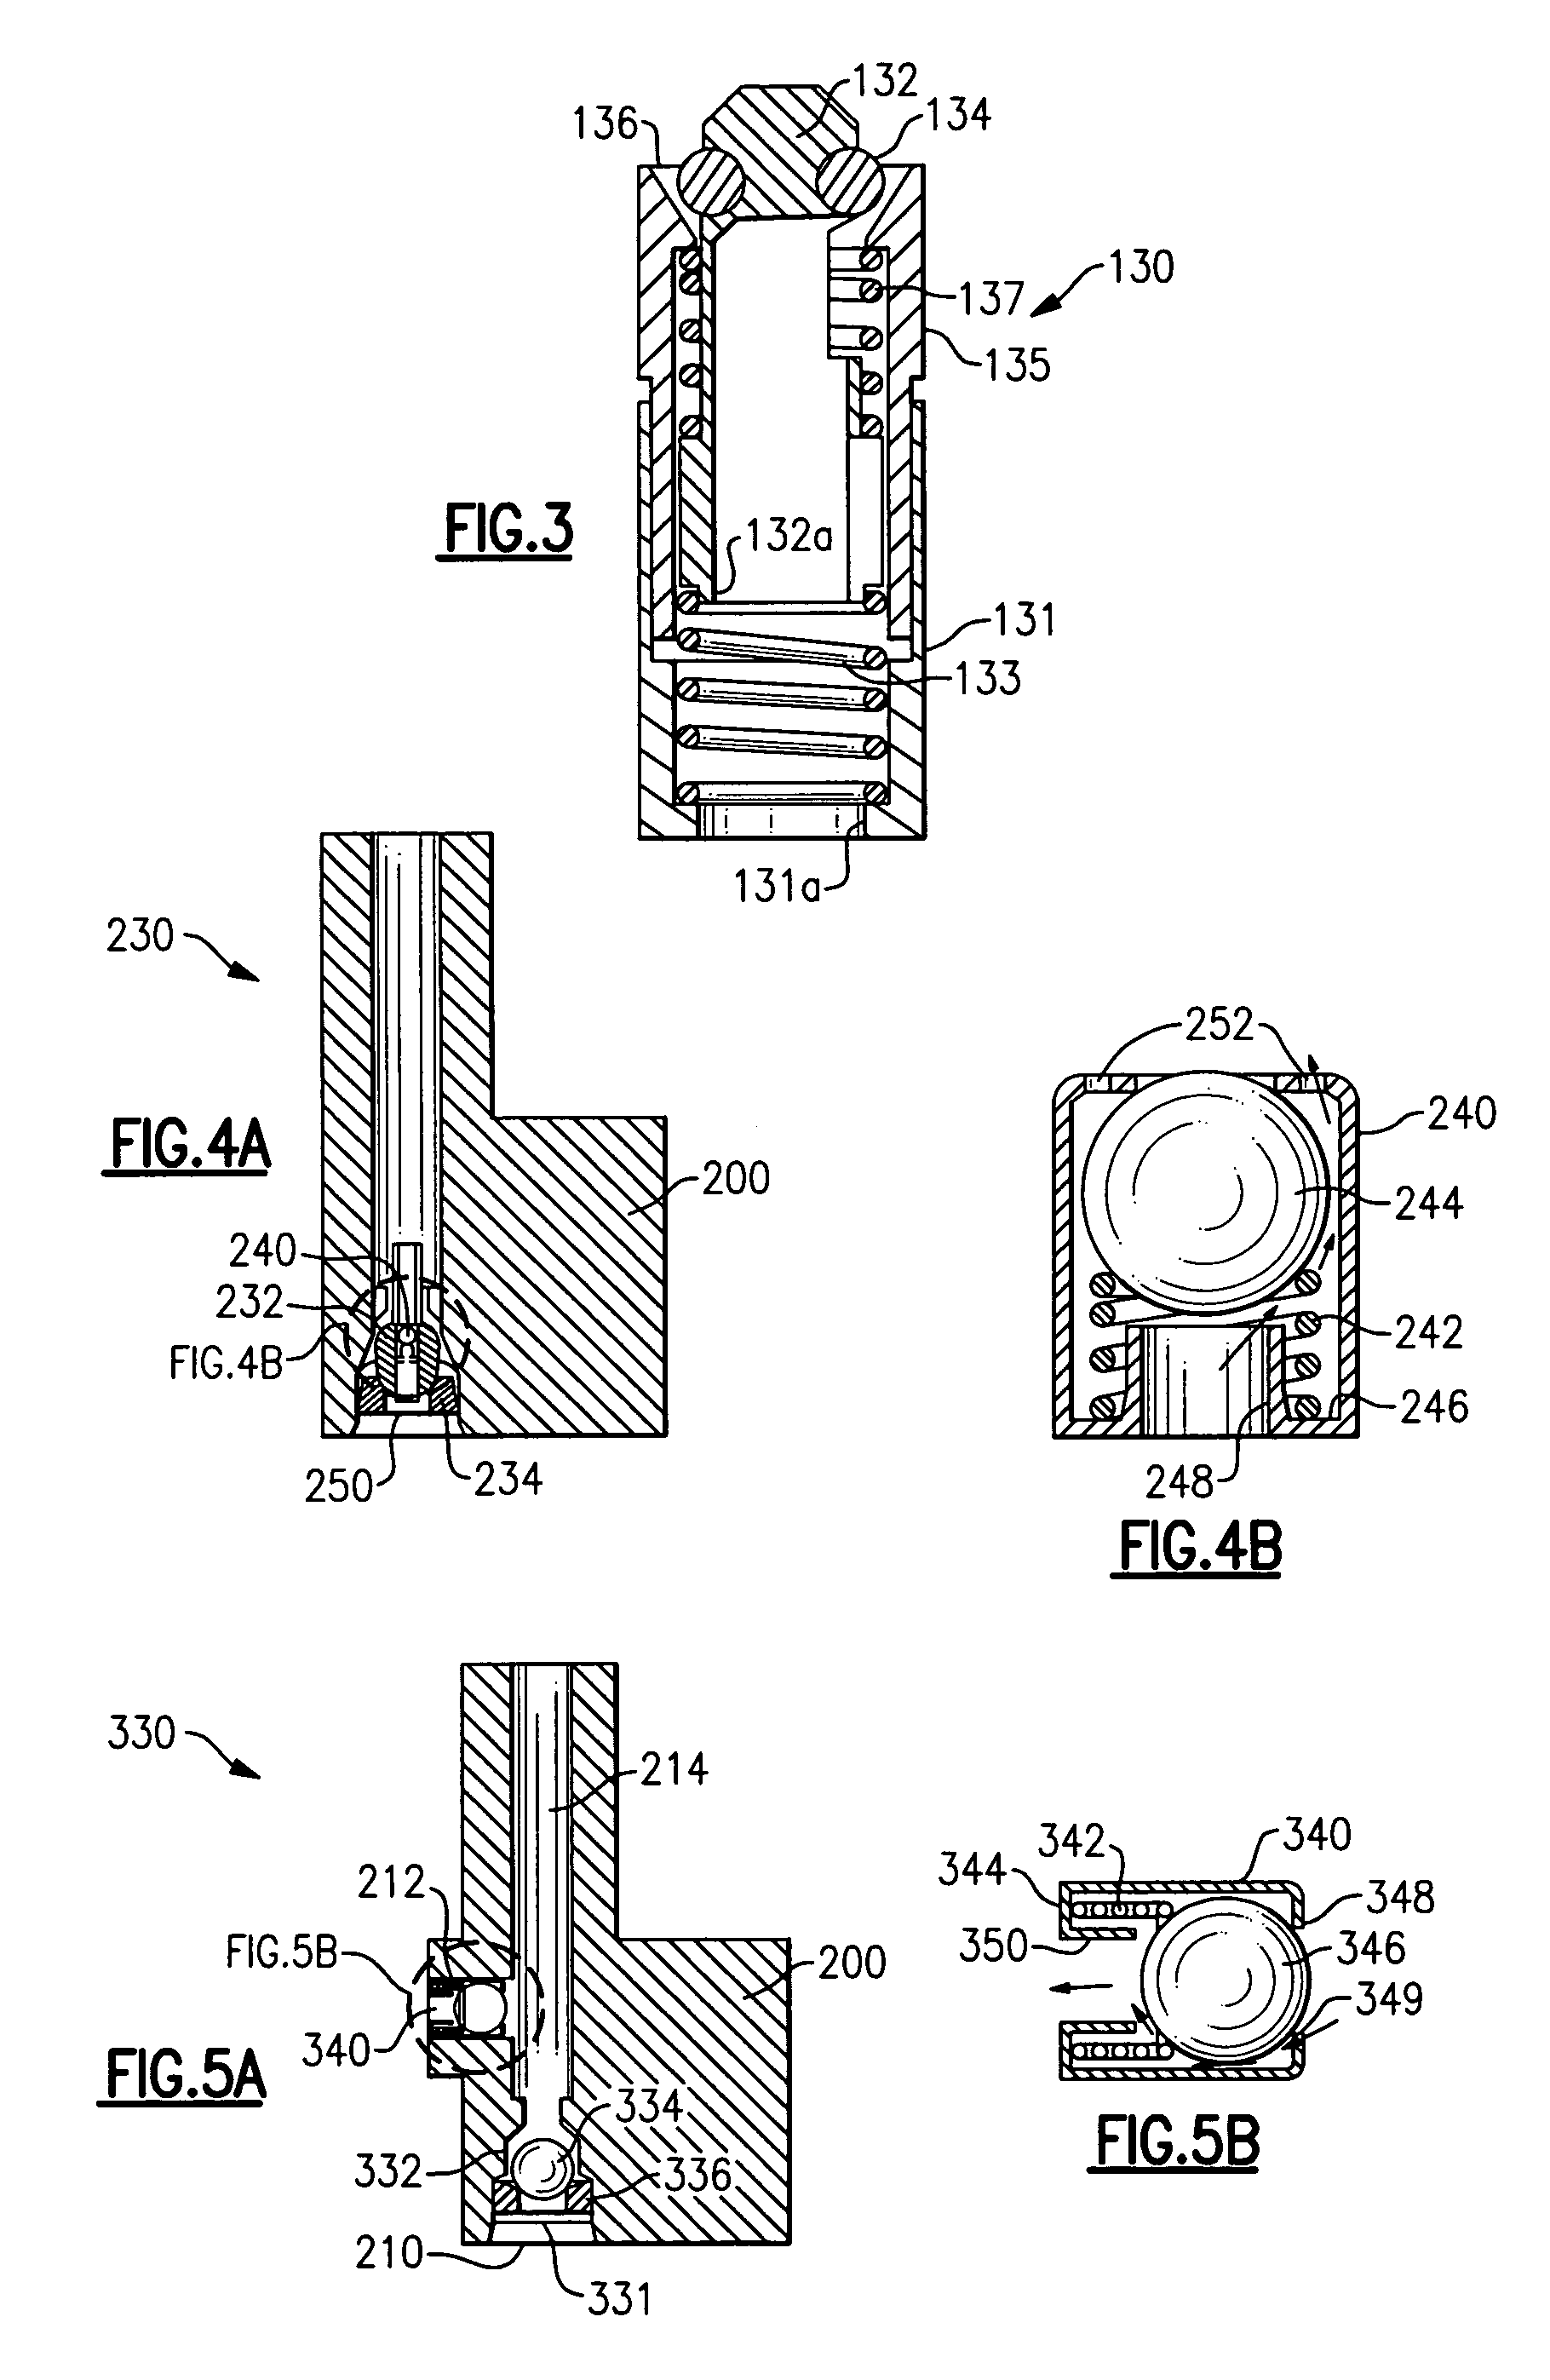 Three position fuel line check valve for relief of diurnal pressure